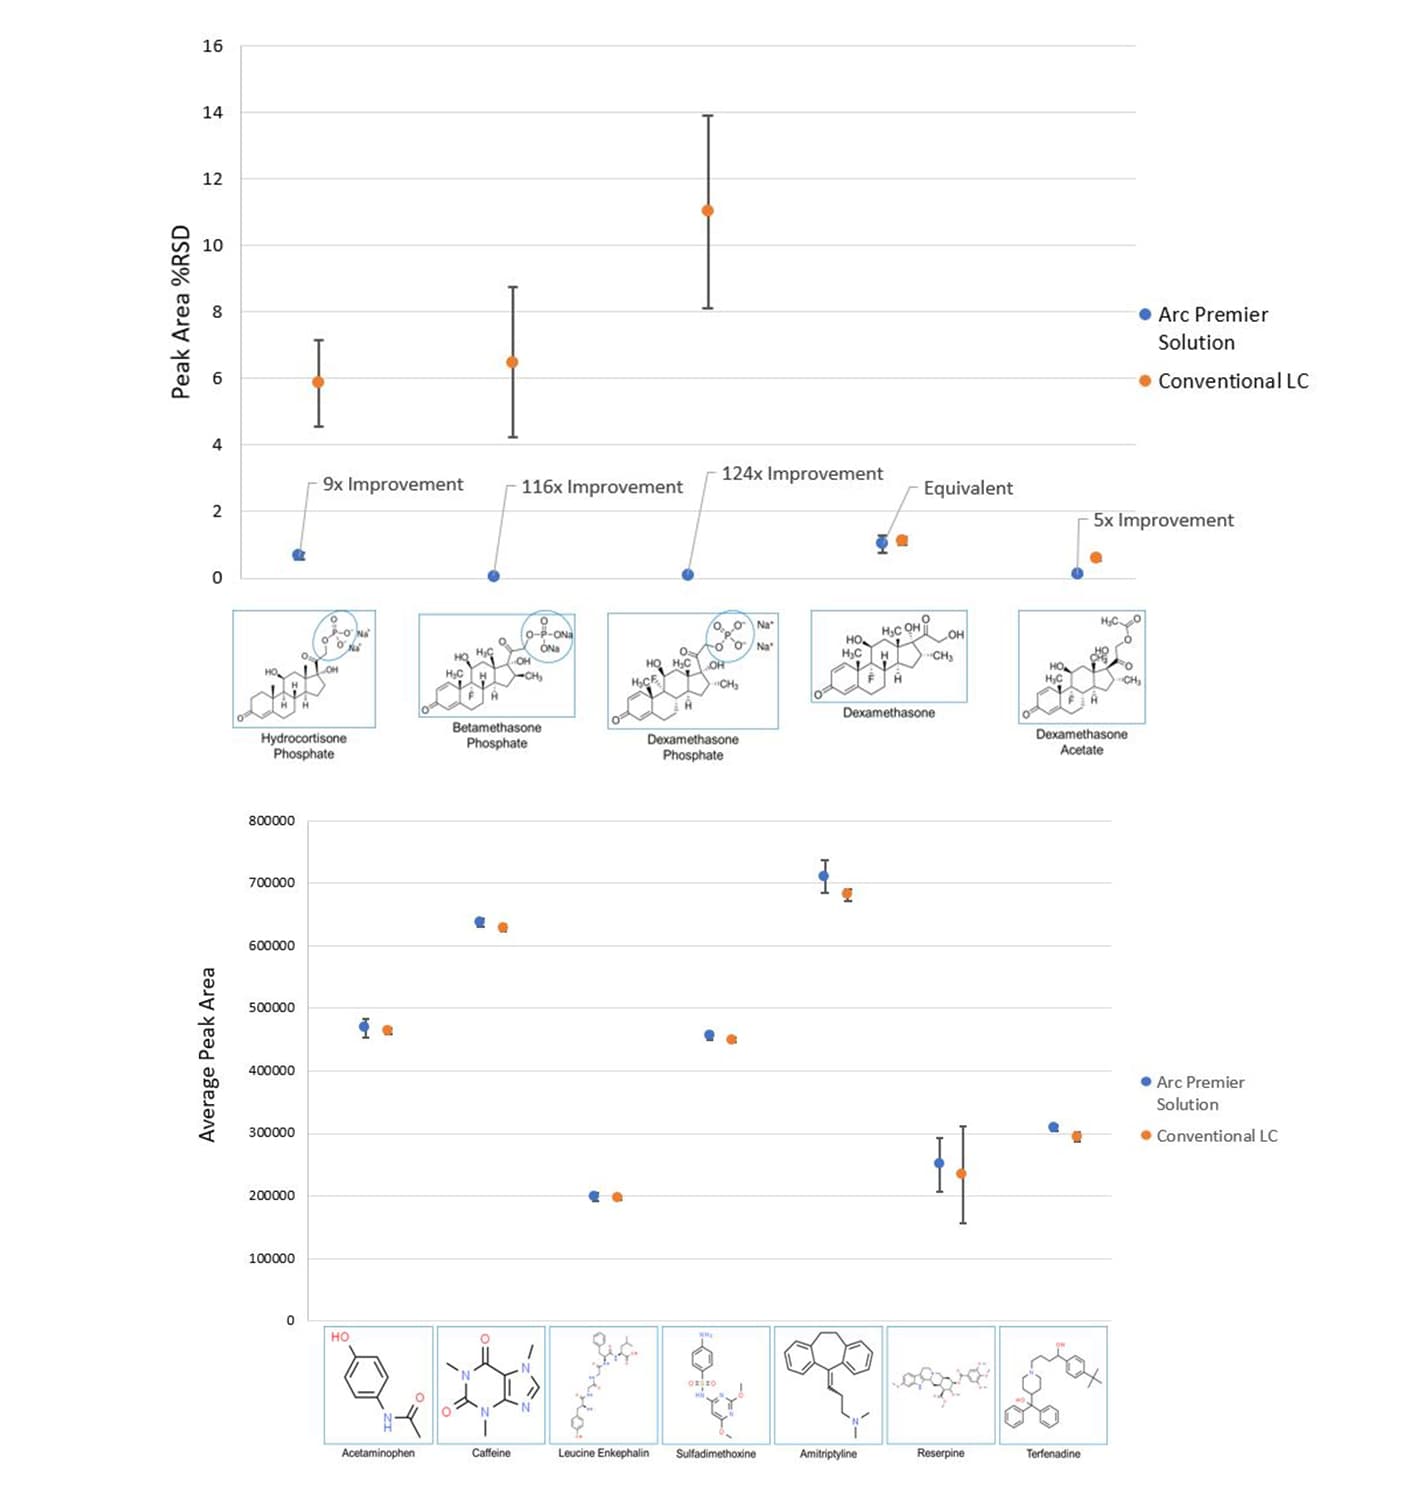 Analysis of data of hydrocortisone phosphate, betamethasone phosphate, dexamethasone phosphate, dexamethasone, and dexamethasone acetate from an Arc Premier System and a conventional LC system by six users. Peak area reproducibility improved 9-124x.